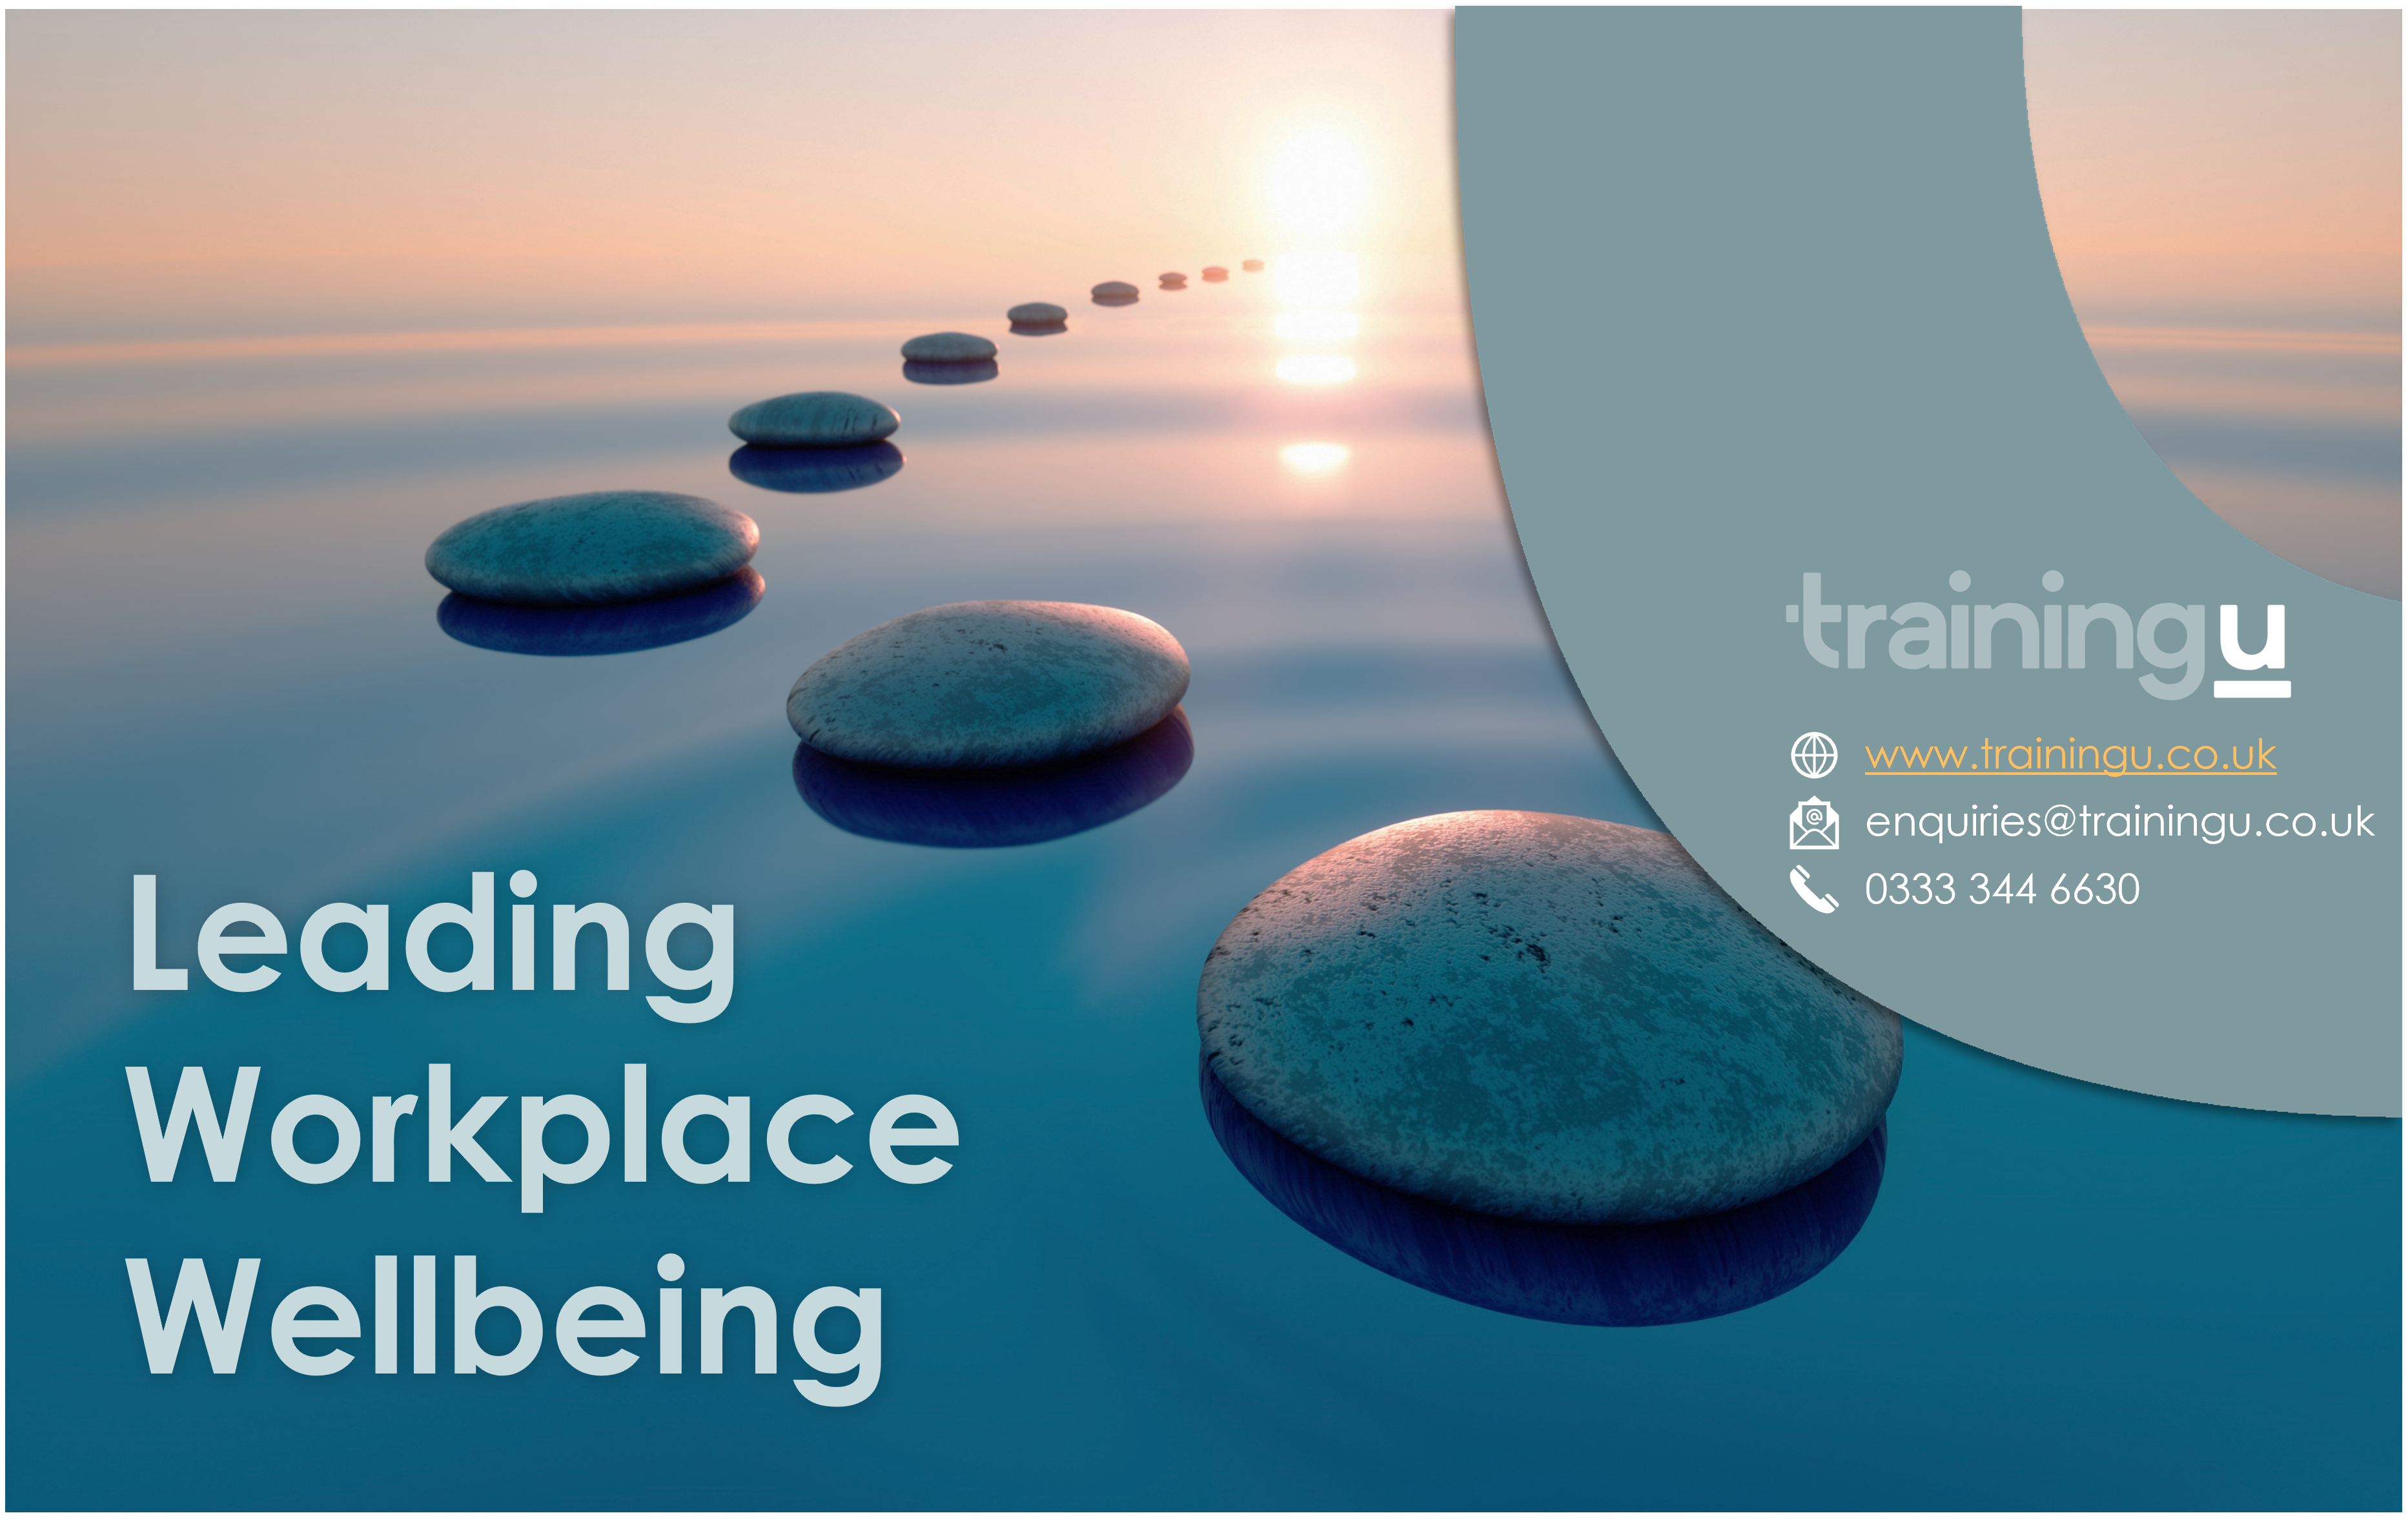 NEW Course: Leading Workplace Wellbeing